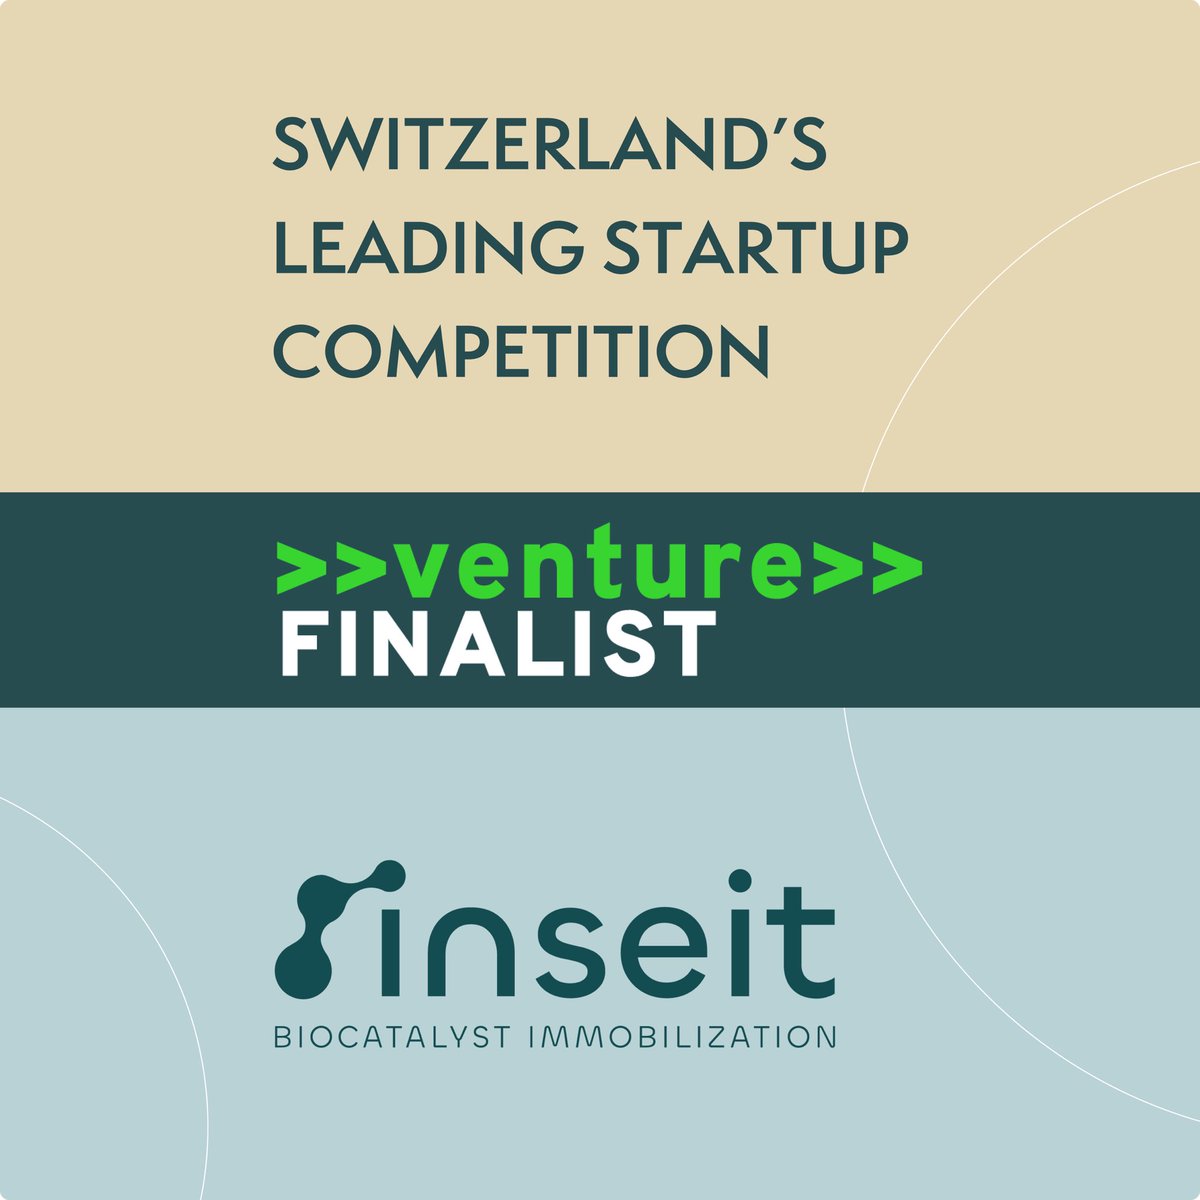 We are pleased to announce that #inSEIT is a >>venture>> #Finalist!
We have been ranked among the #top 10 #startup projects in the #Industrials & #Engineering category and will advance to the next round! 
Let’s go @inSEITbiotech! 🔥
#innovation #biotech #industry #biocatalysis